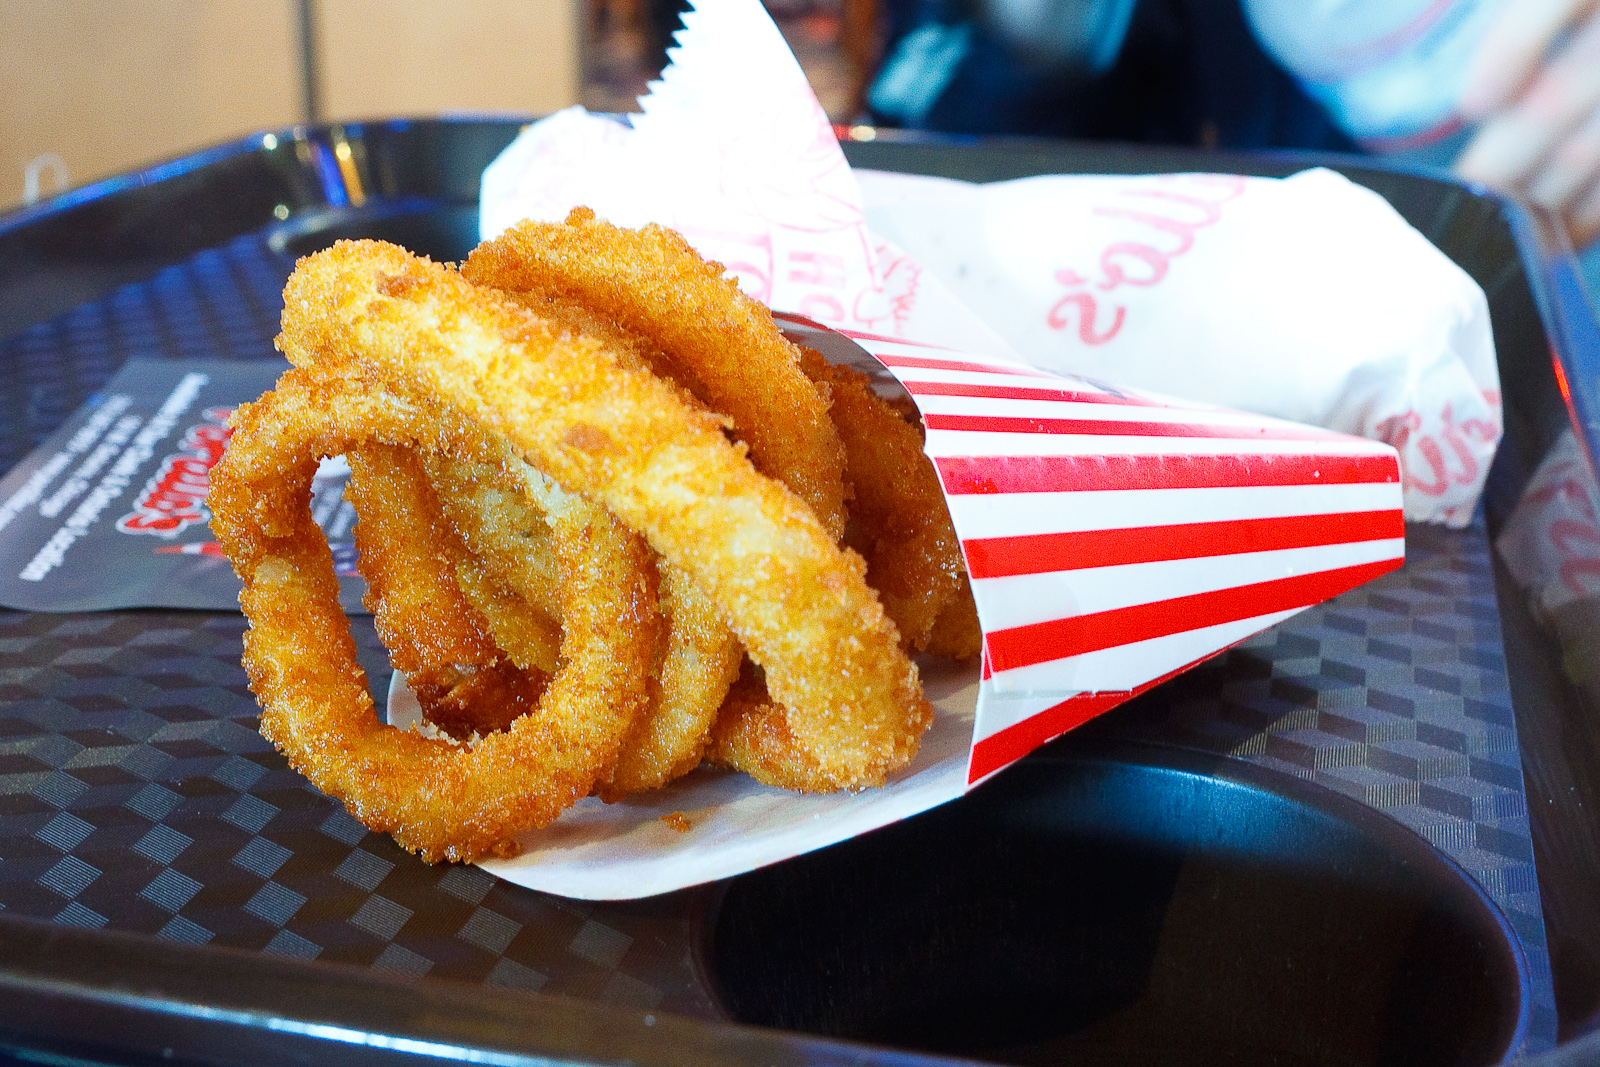 Side of onion rings ($1.99)